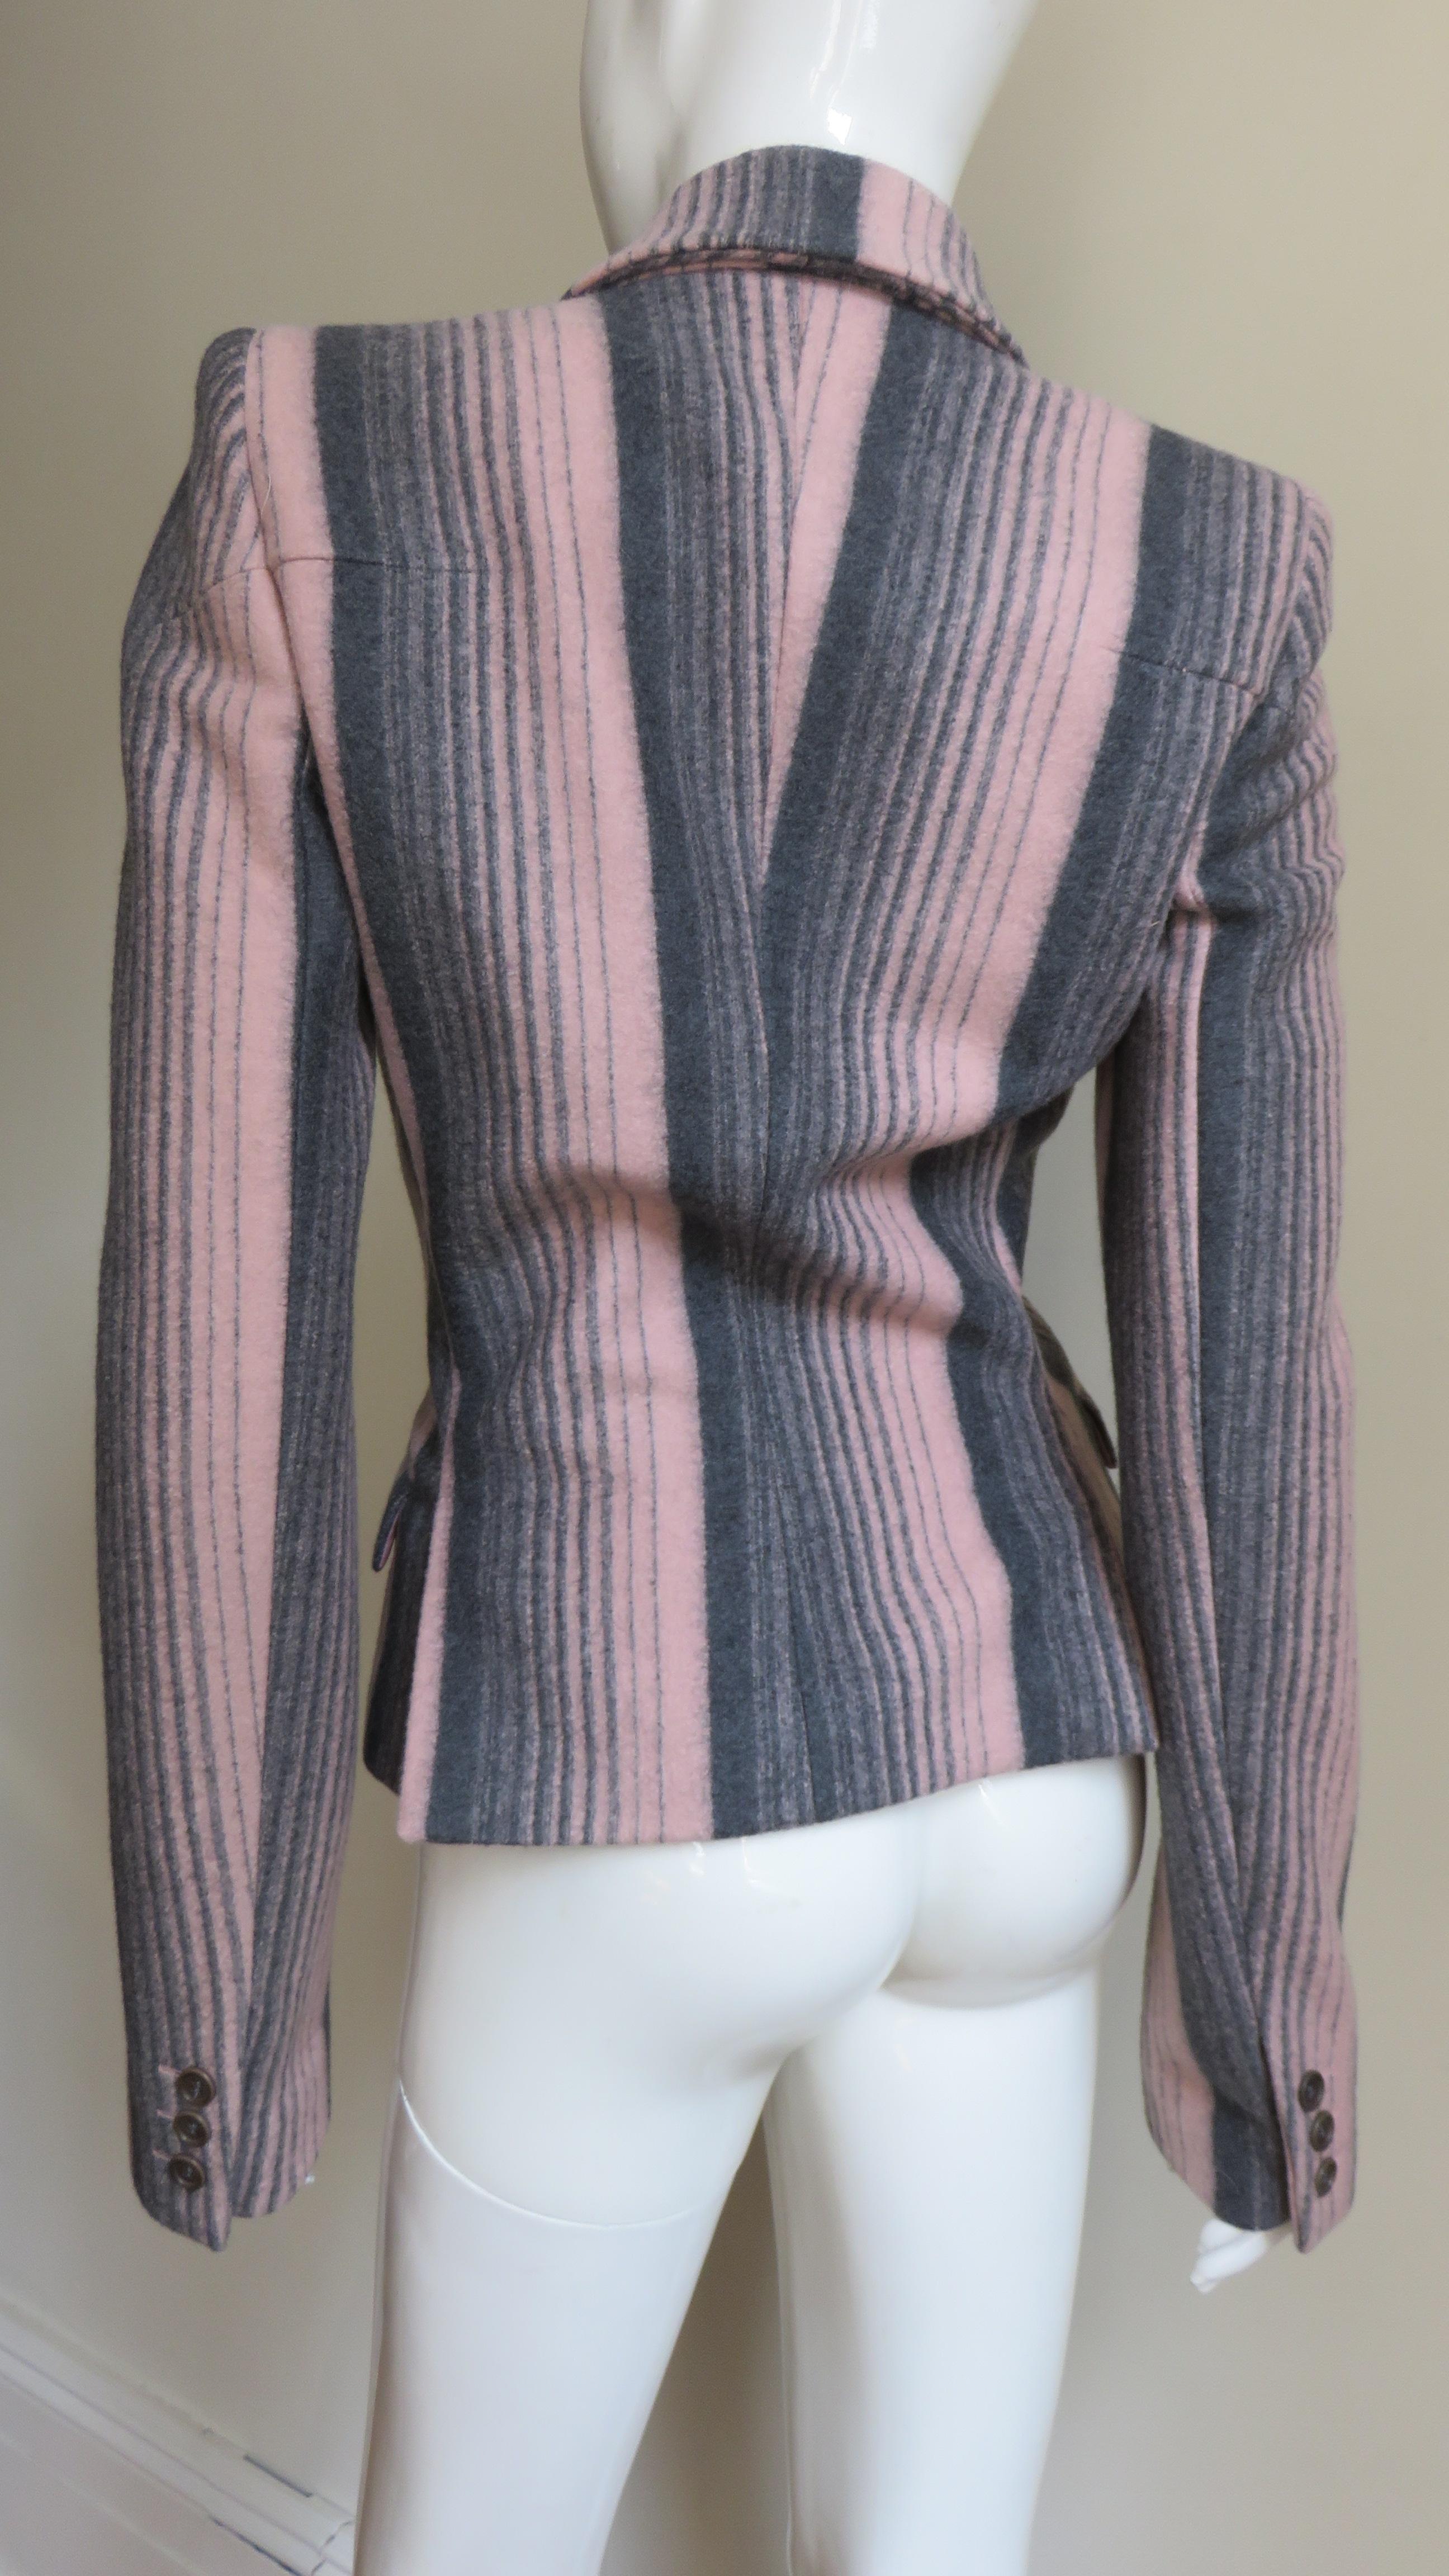 Alexander McQueen New Grey and Pink Striped Jacket F/W 1999 For Sale 6